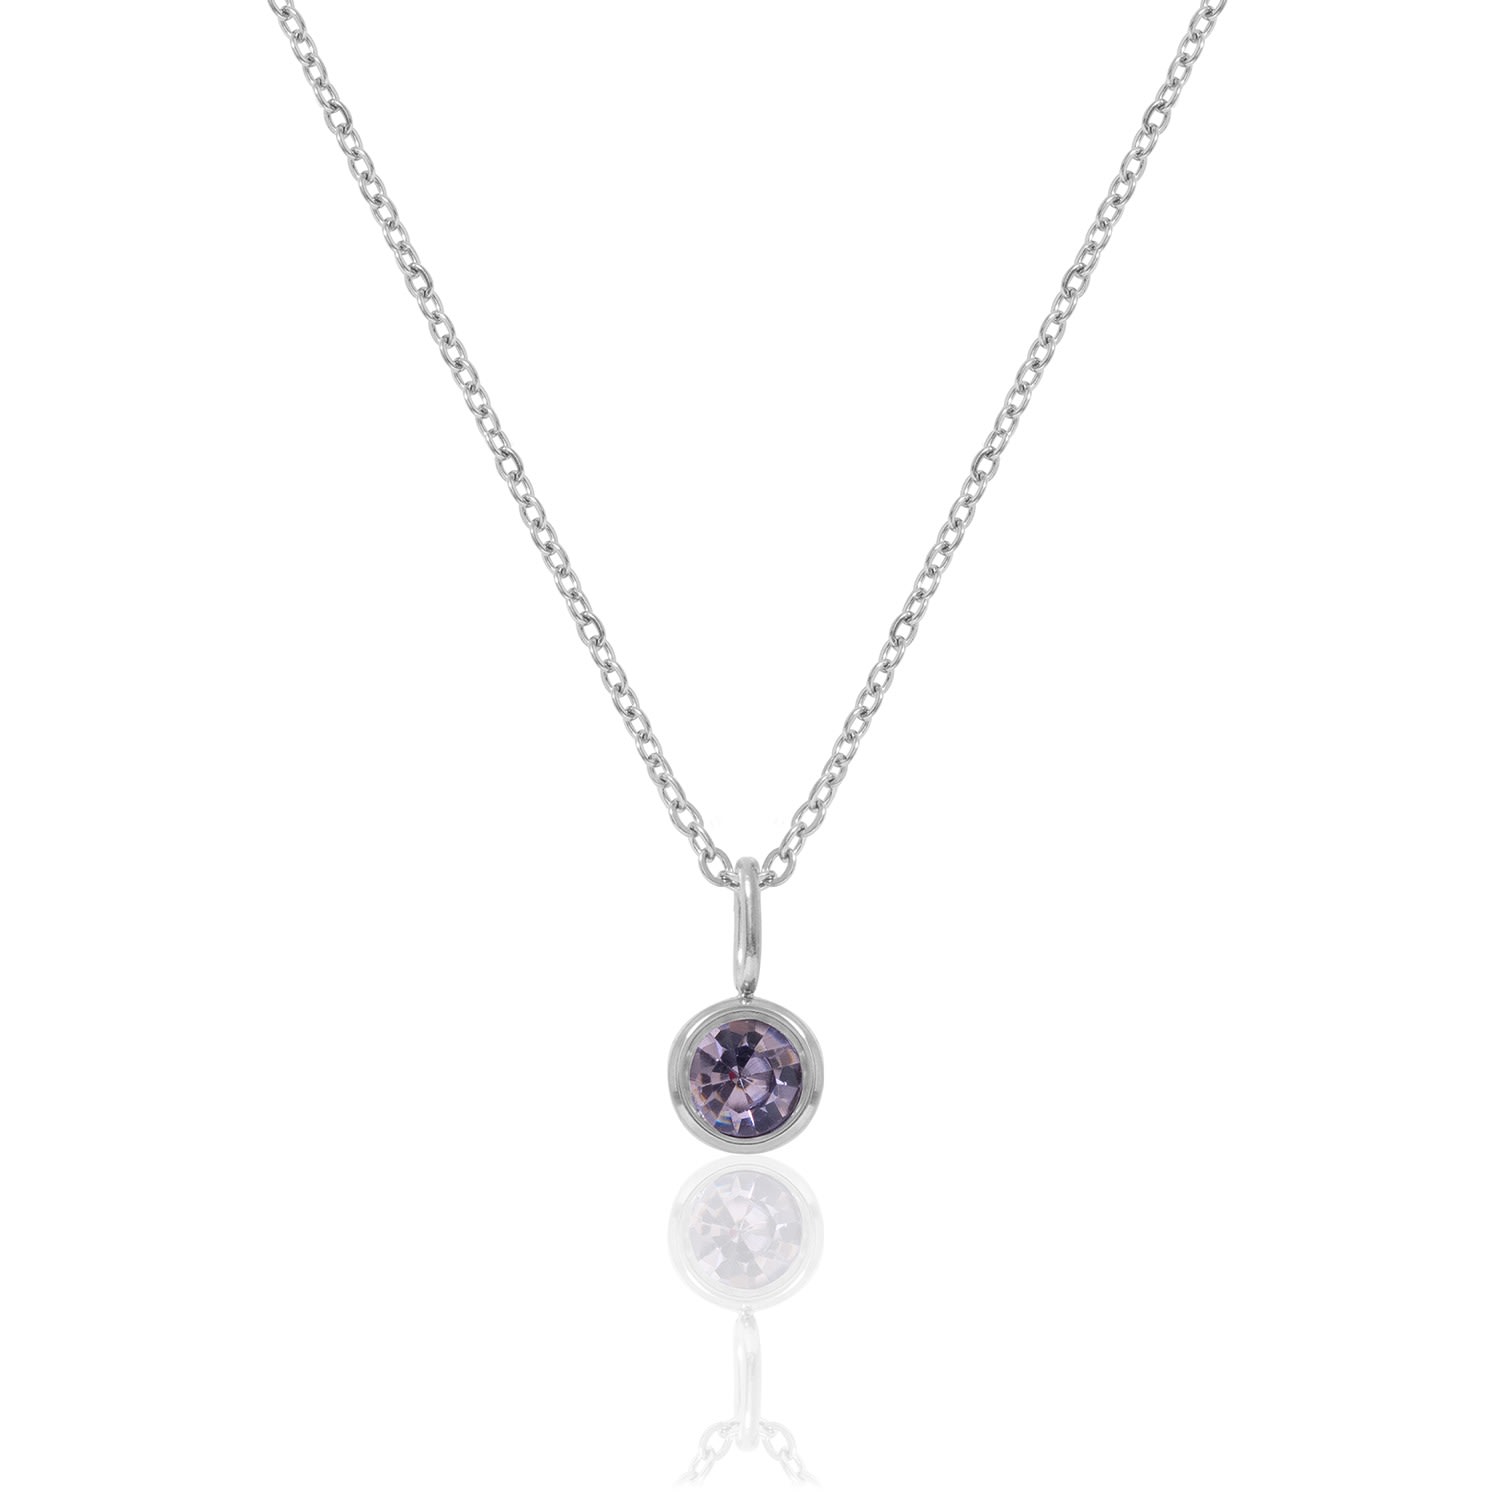 A Weathered Penny Women's Pink / Purple / Silver Silver Birthstone Necklace - February